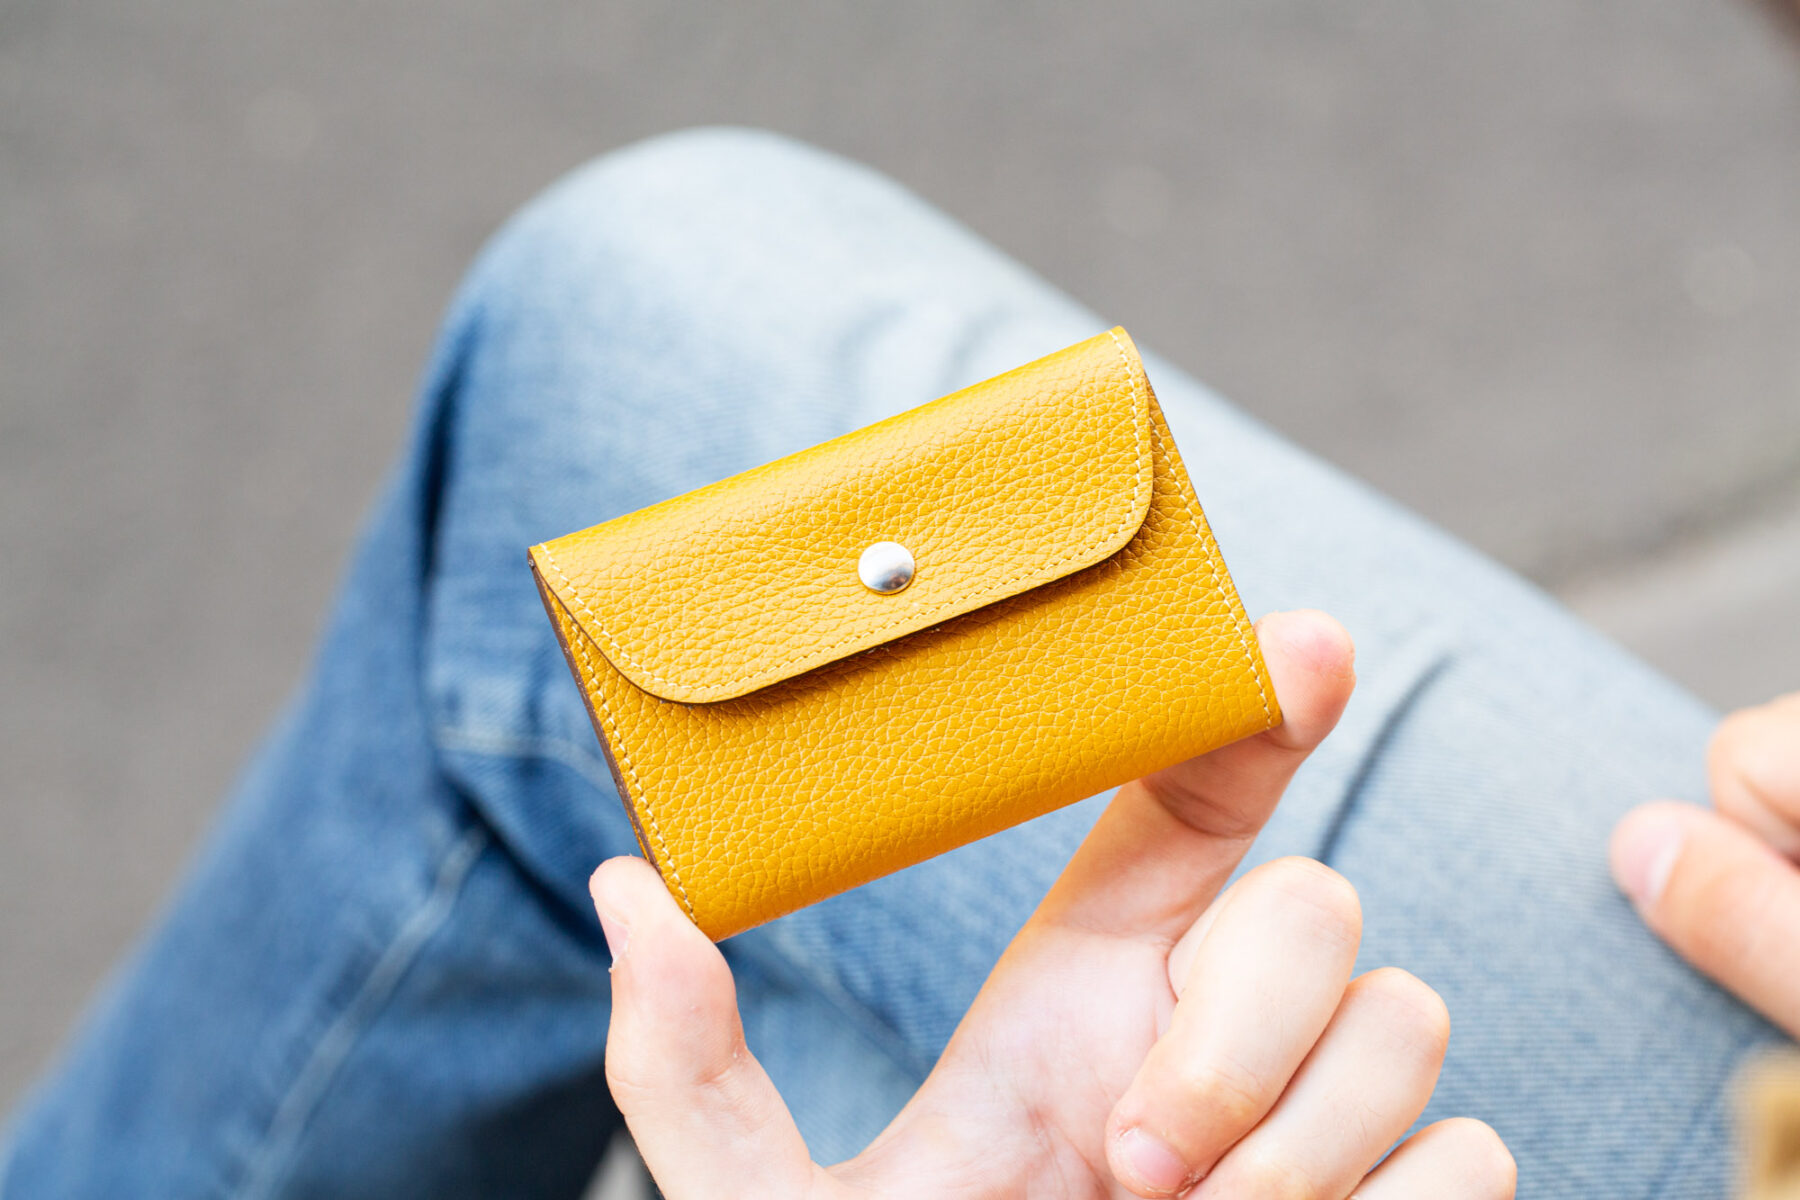 Card Holder - Yellow leather card holder